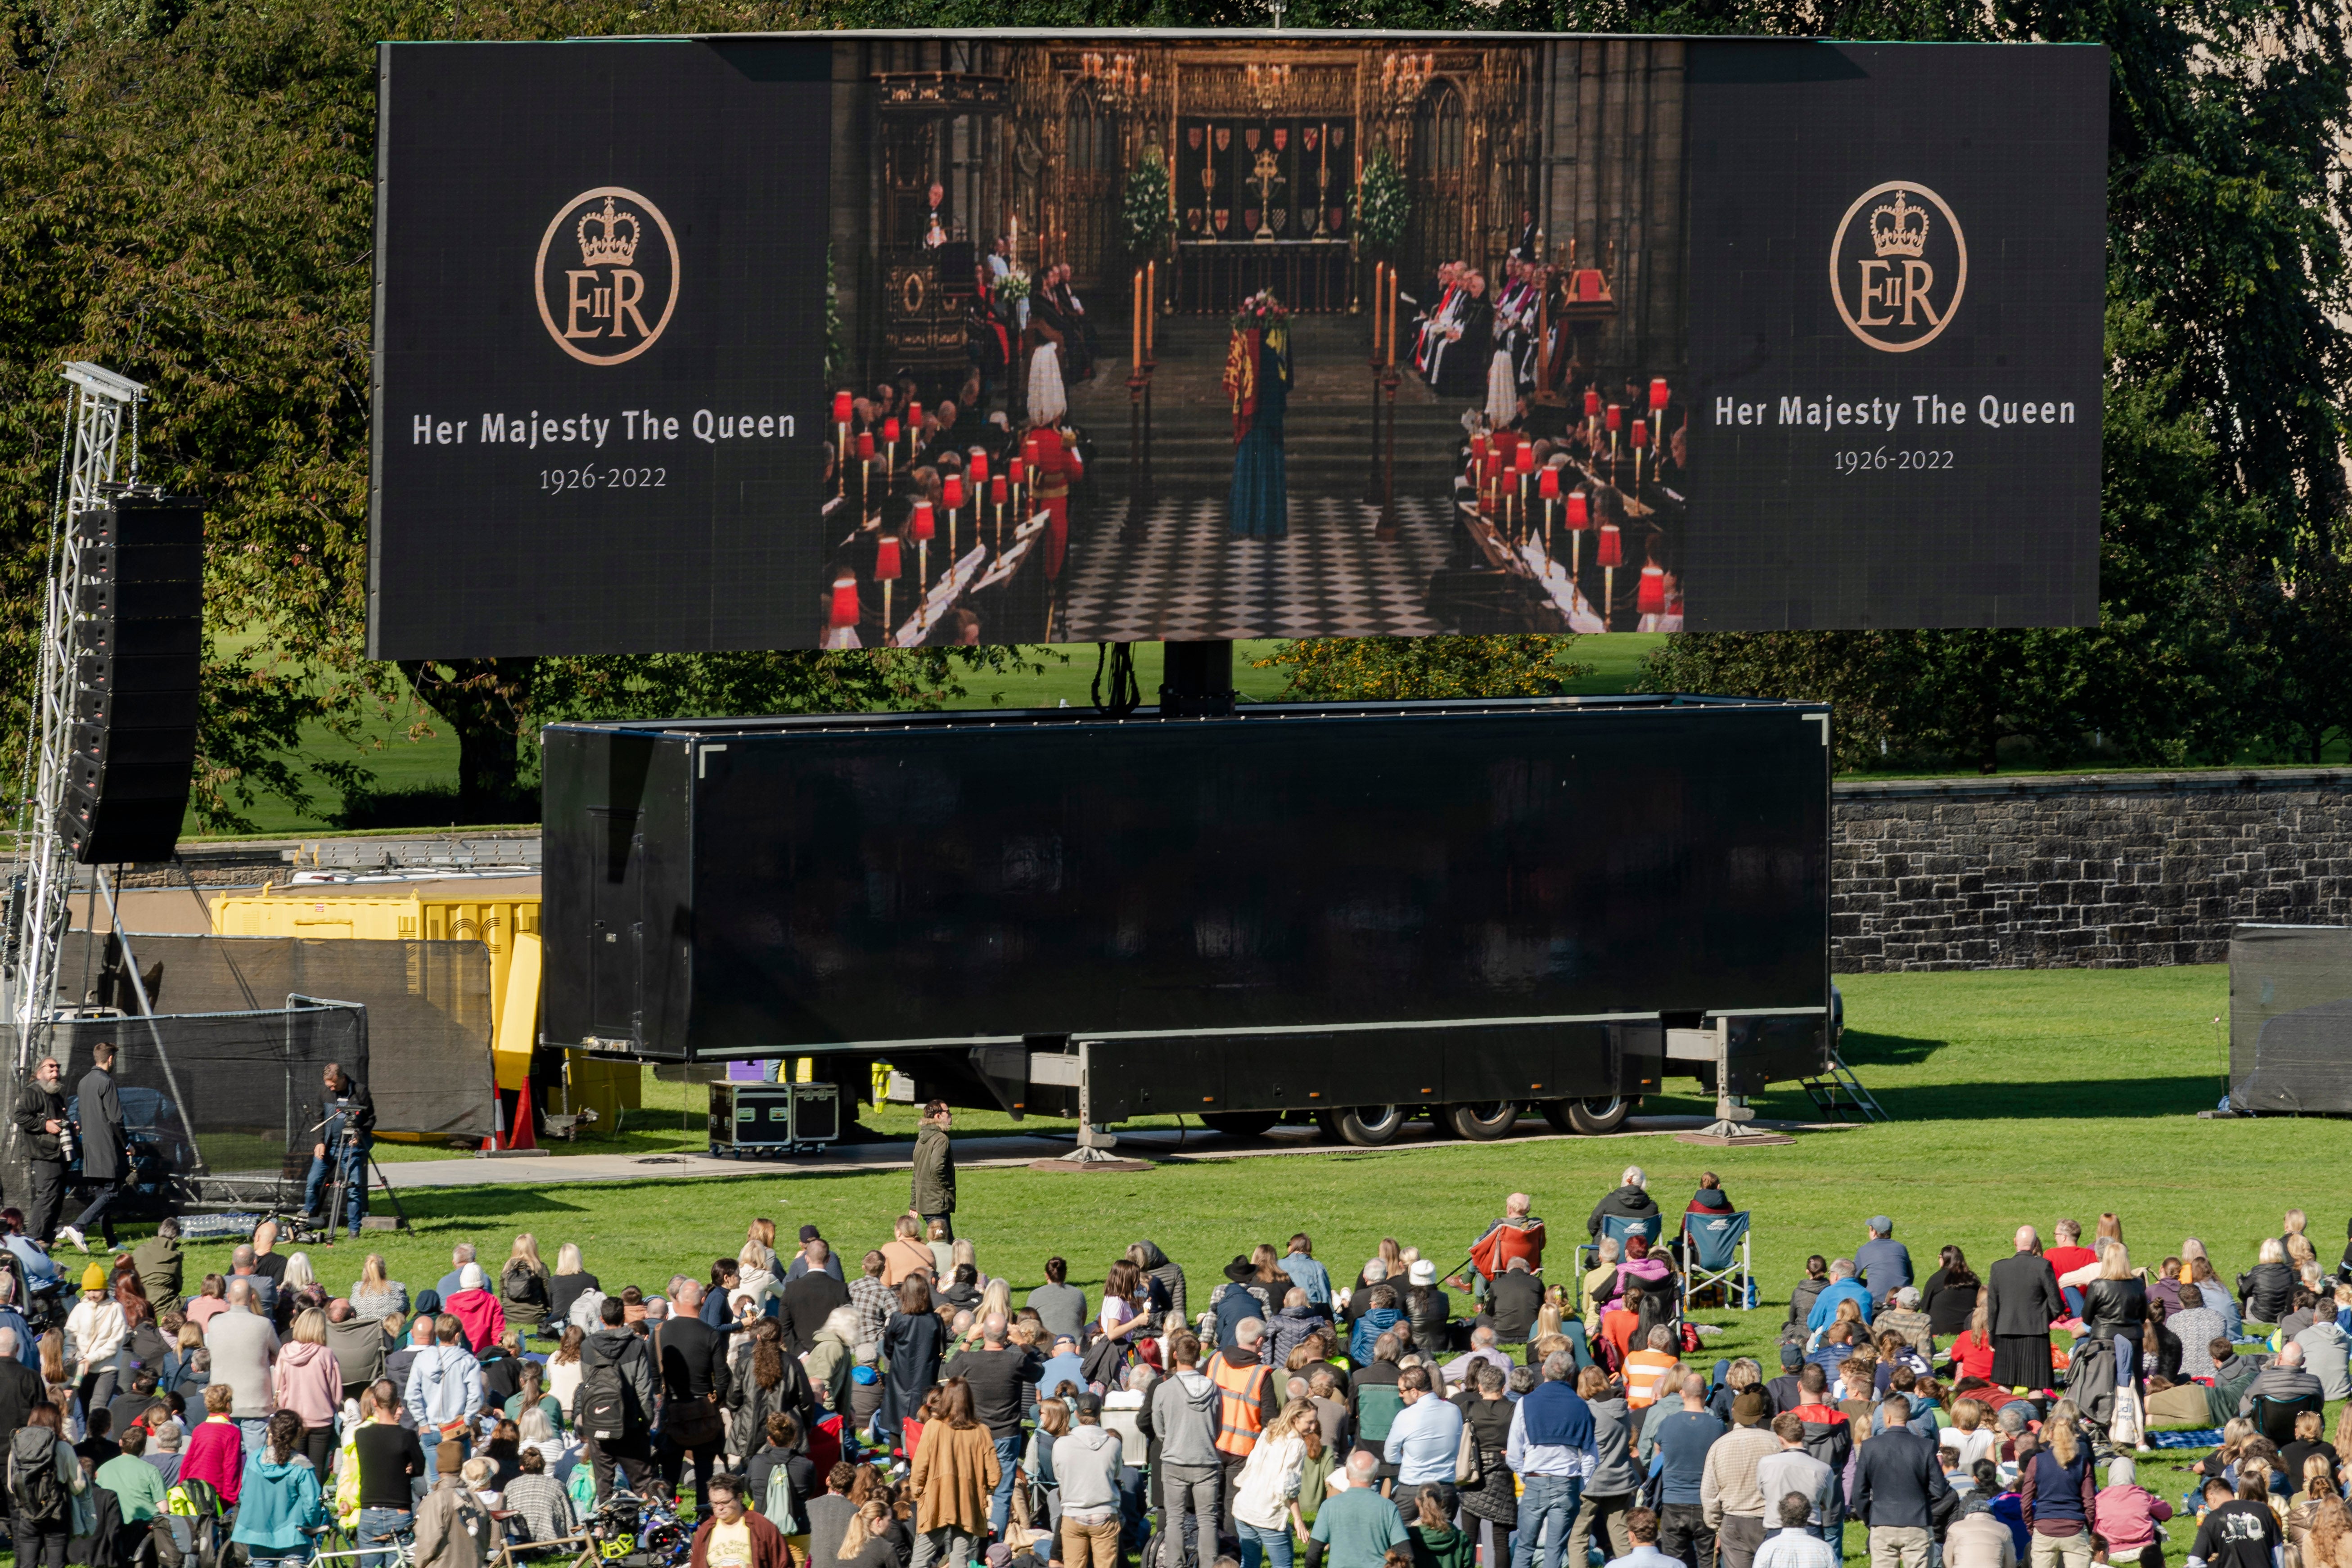 Members of the public watch Queen Elizabeth II’s state funeral on a TV screen in Holyrood Park, Edinburgh